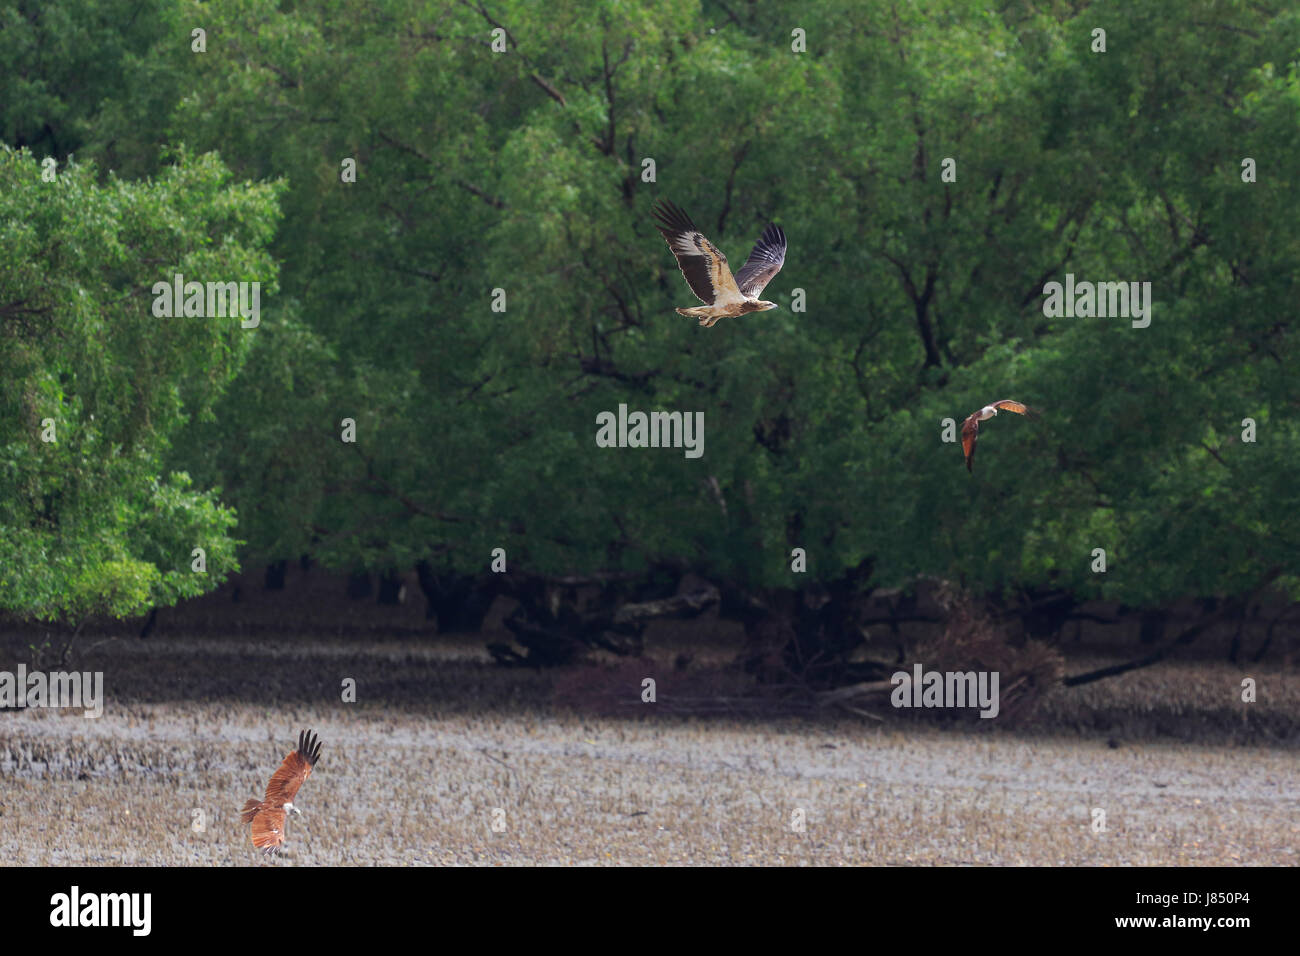 Brahminy kite (Haliastur indus) in the world largest mangrove forest Sundarbans, famous for the Royal Bengal Tiger and UNESCO World Heritage site in B Stock Photo